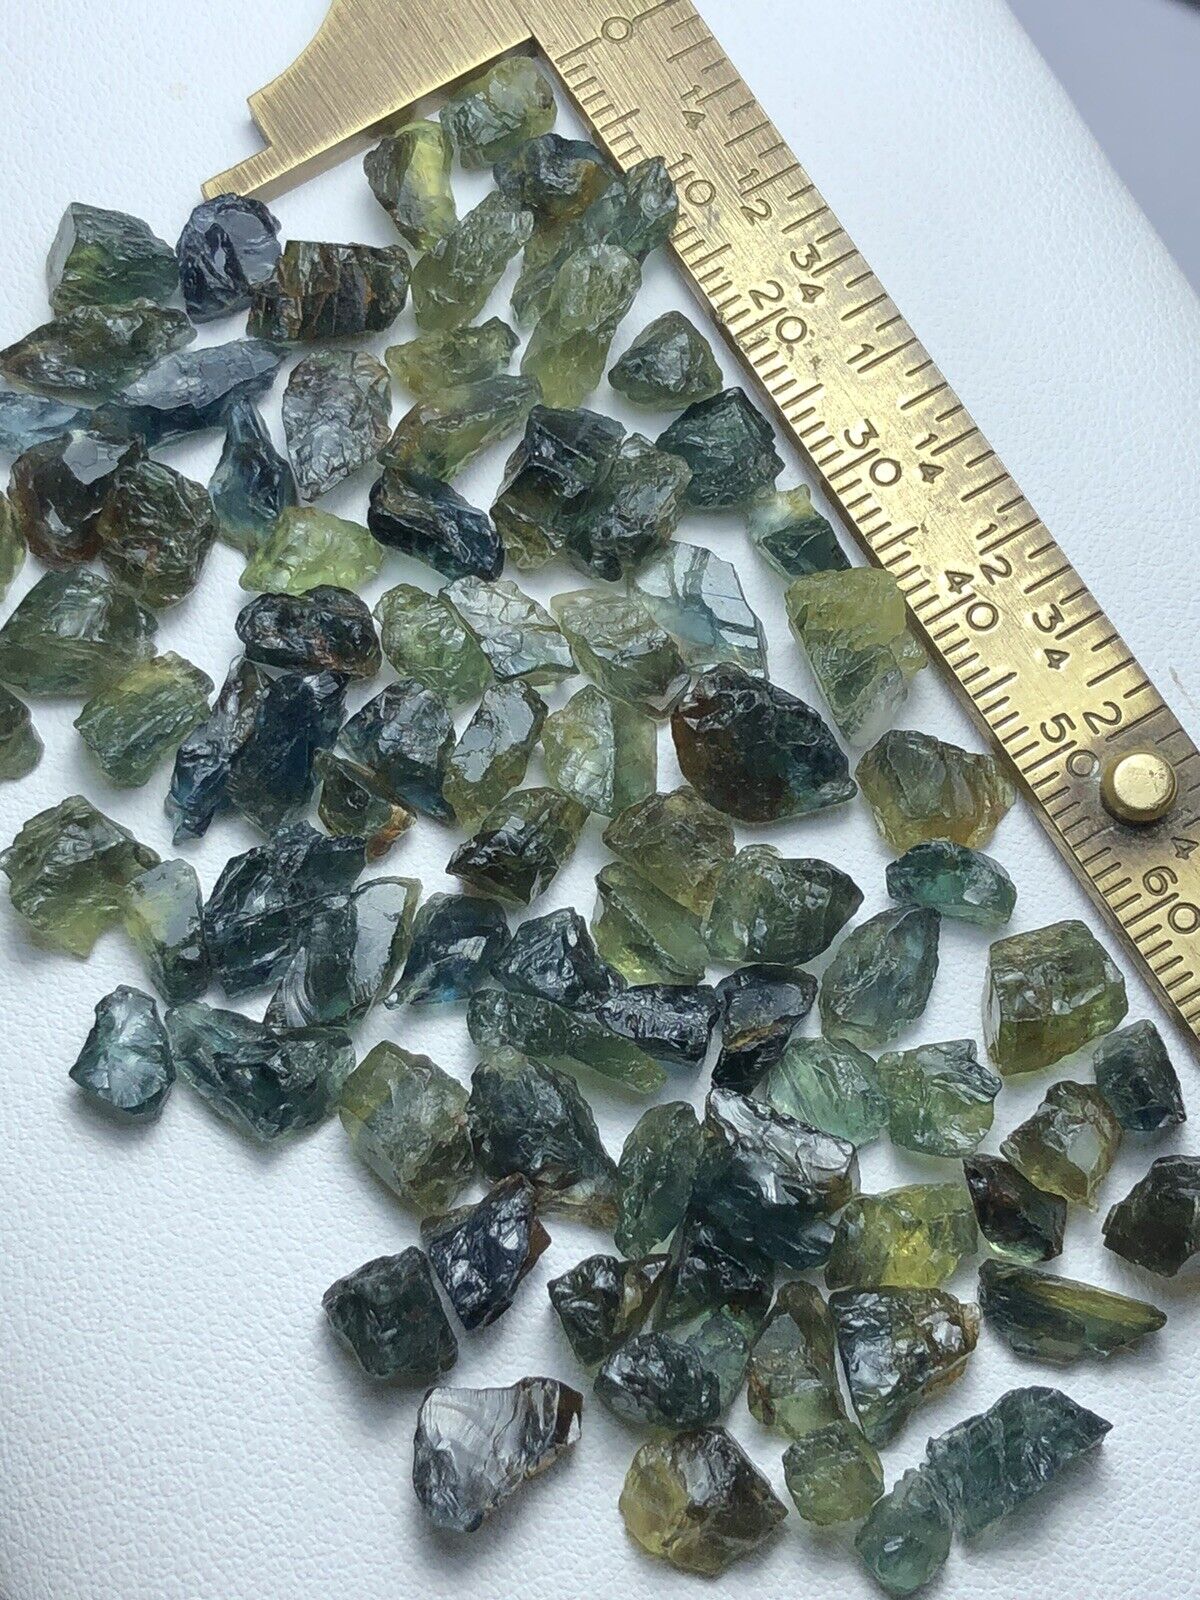 151 Crt /Natural Green Party Sapphire Rough Good Quality Small Sizes Rough Deals